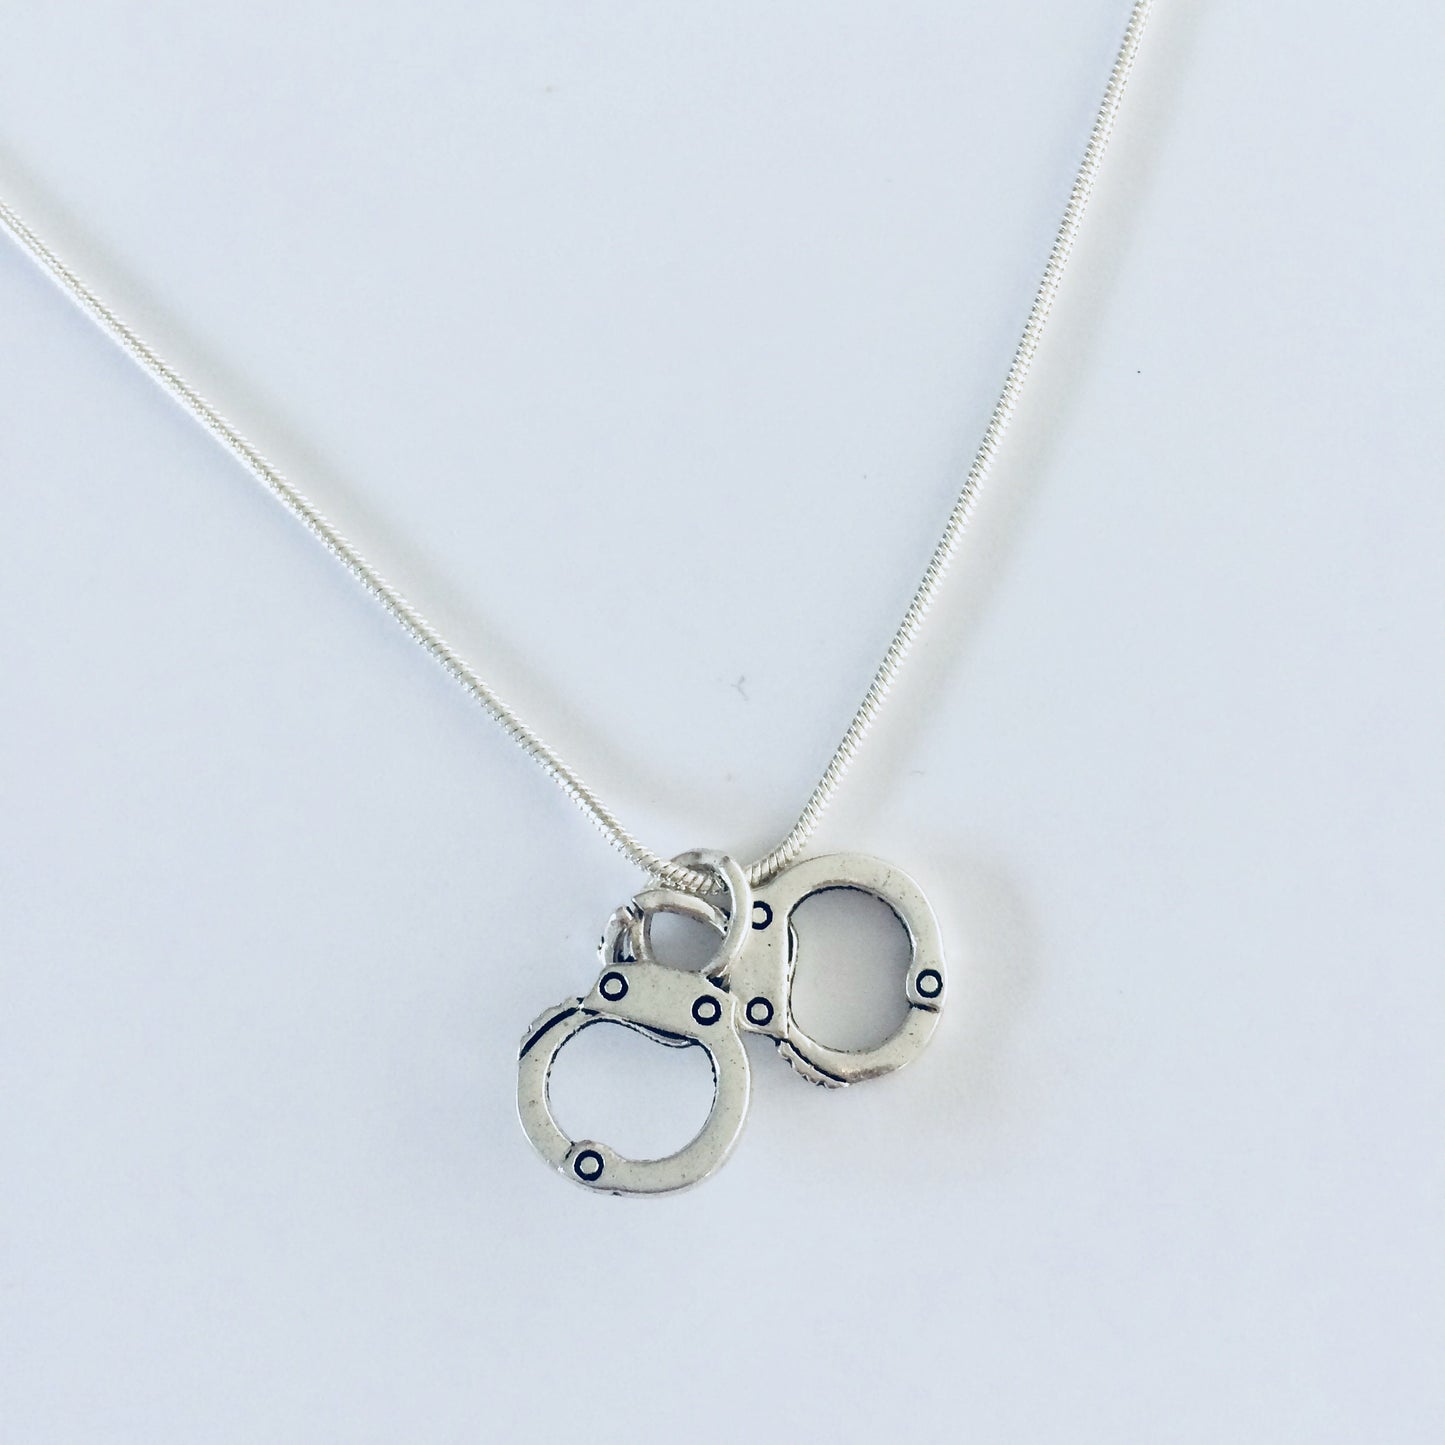 Handcuff Necklace, Handcuff Jewelry, Handcuff Jewellery, Friendship Jewellery, Freedom Gift, Partners In Crime Necklace, Silver Necklace.